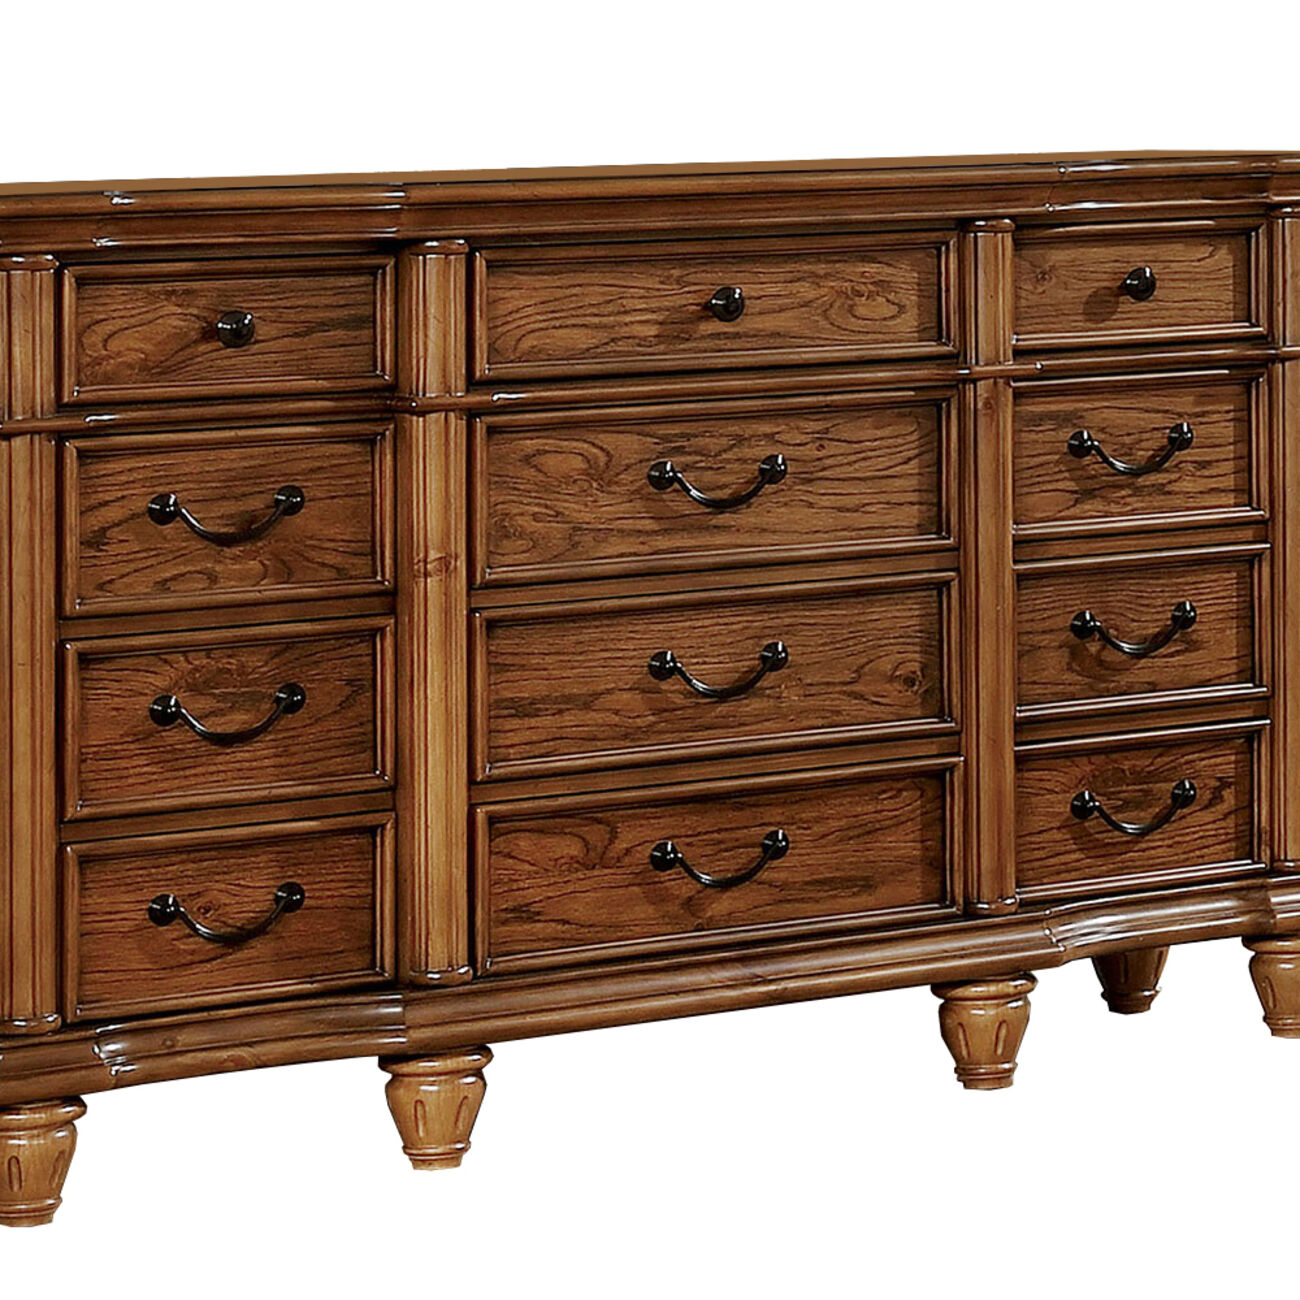 12 Drawer Traditional Style Wooden Dresser with Turned Legs, Brown